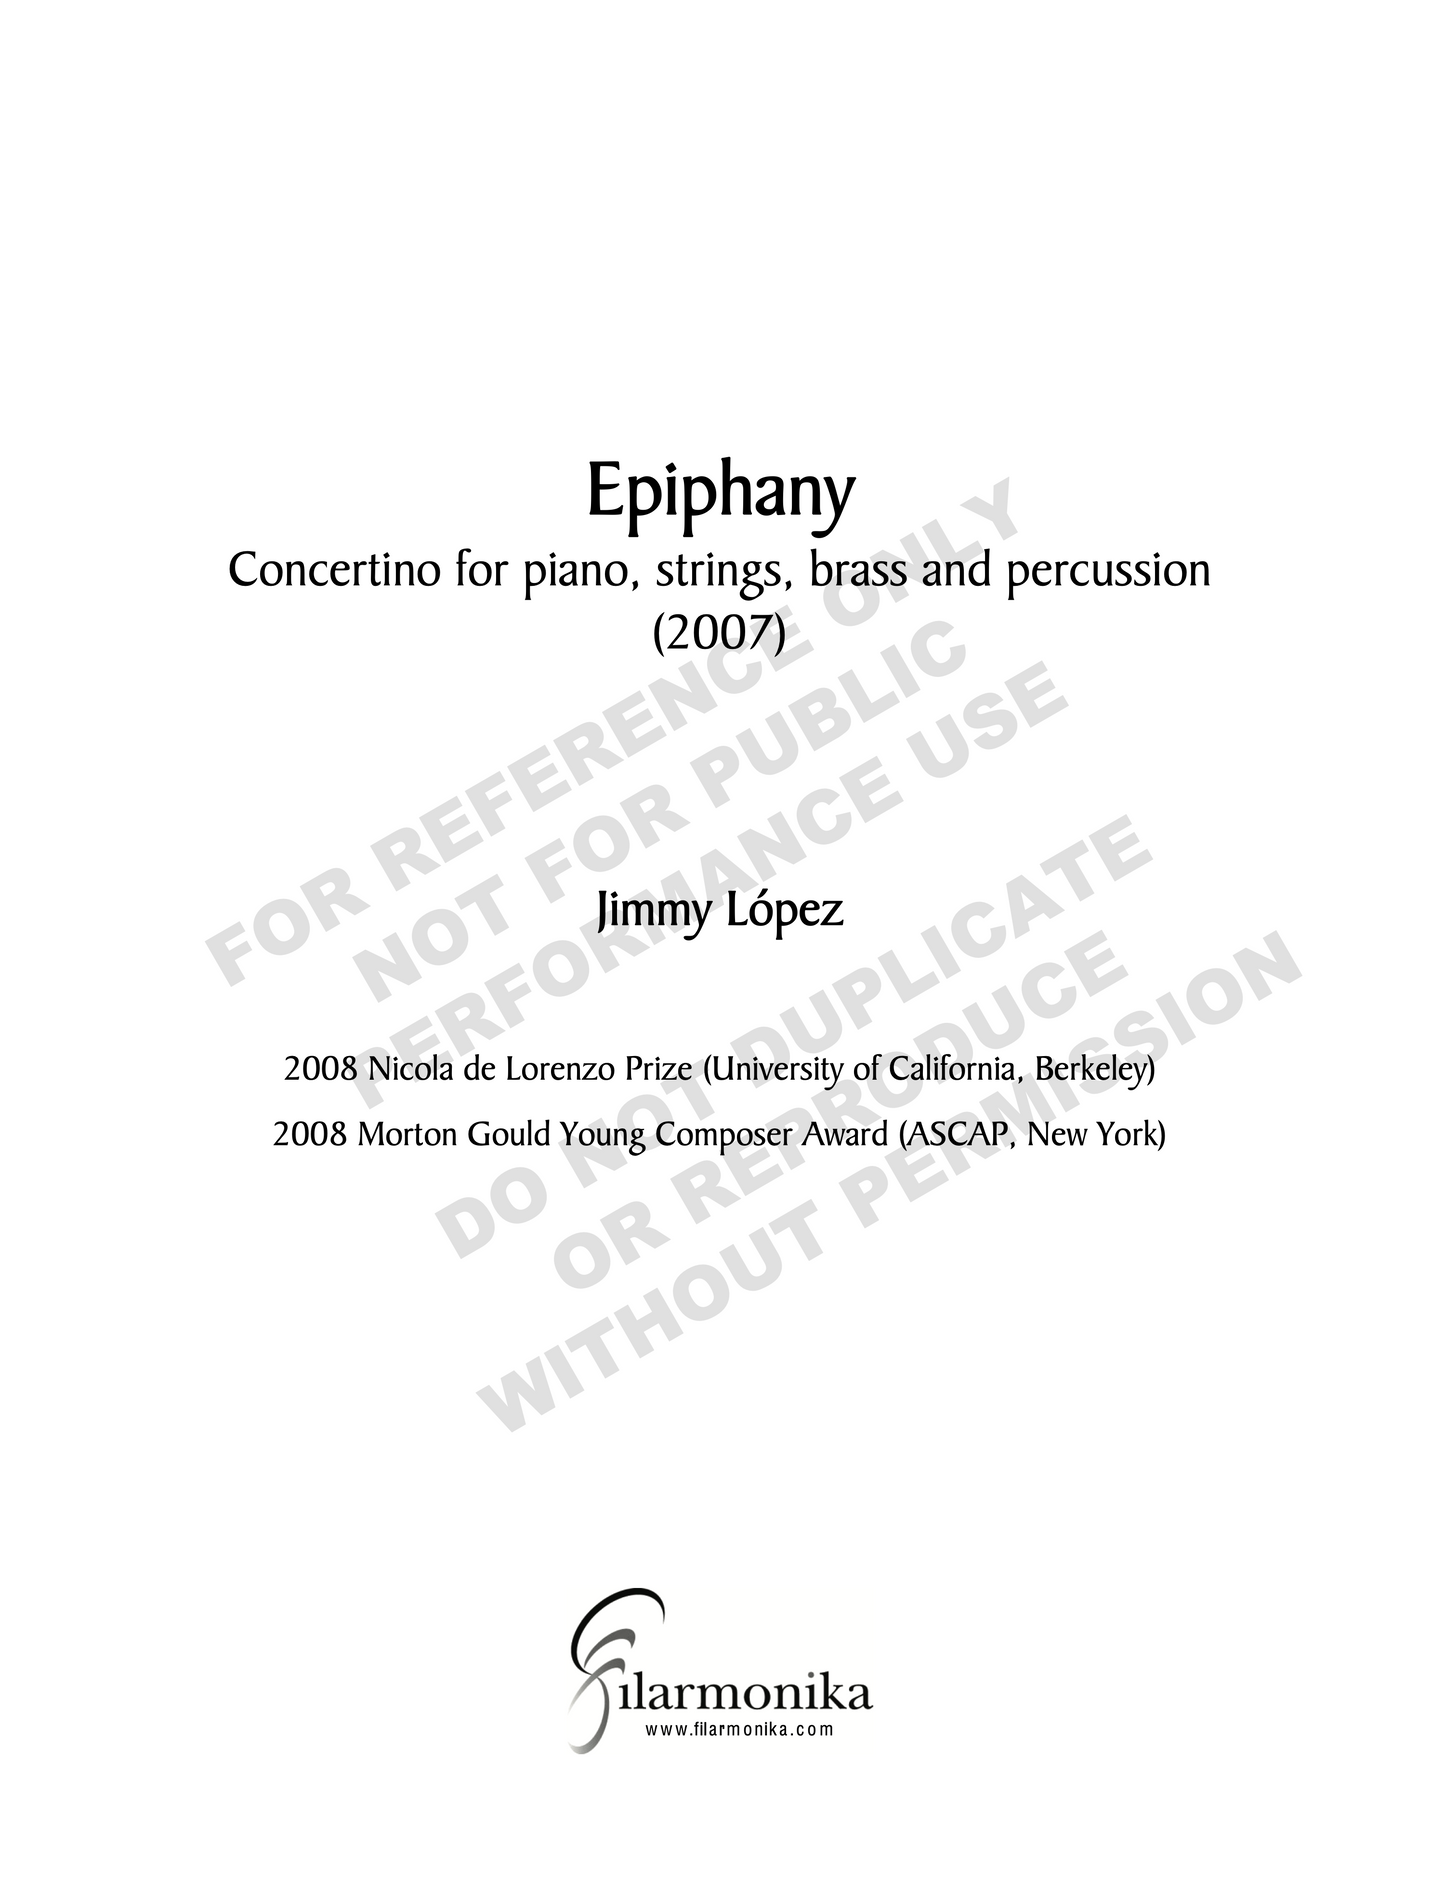 Epiphany, concertino for piano, strings, brass and percussion